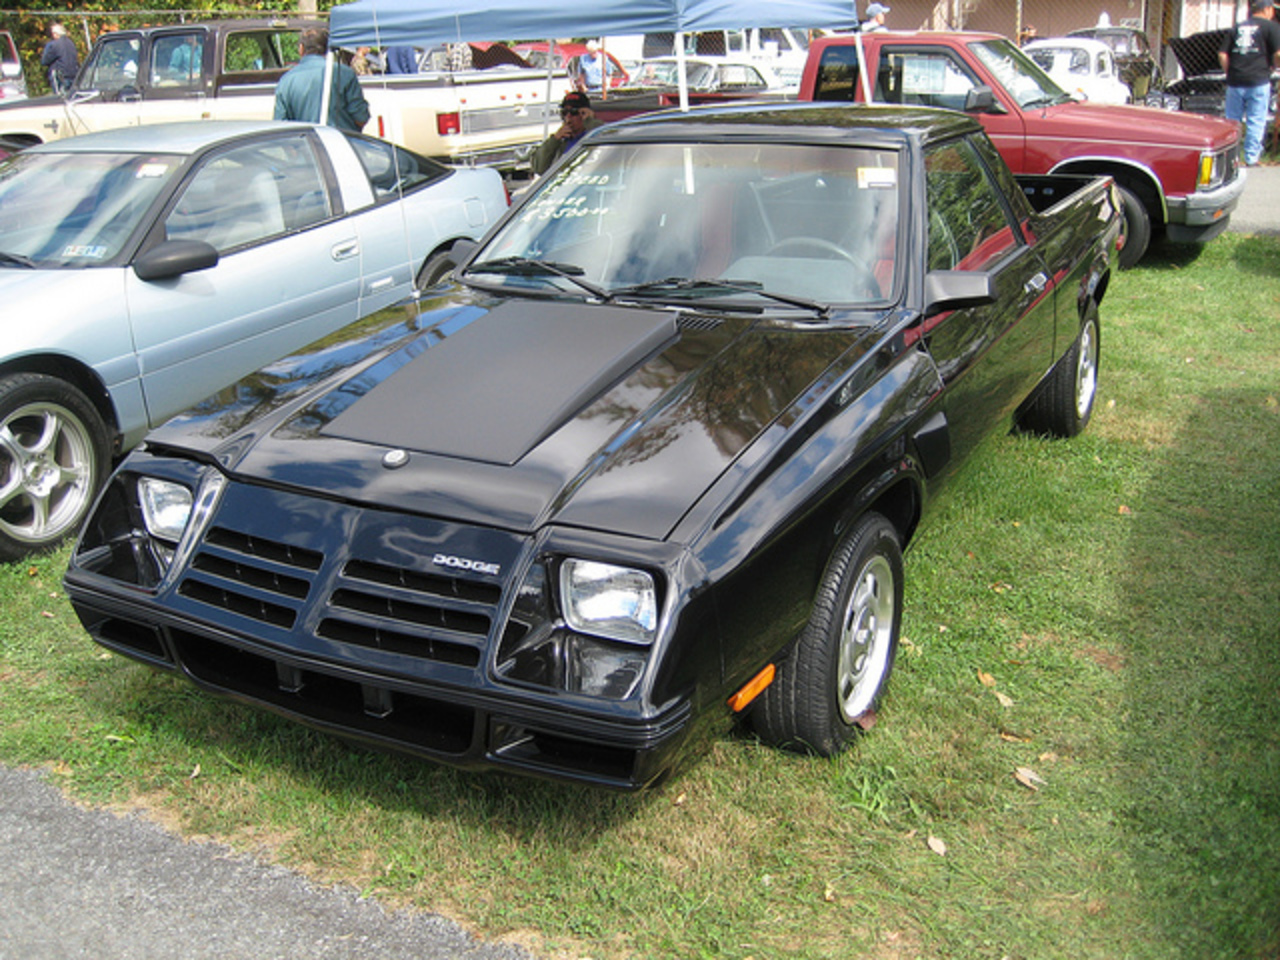 1983 Dodge Rampage for $3500 | Flickr - Photo Sharing!